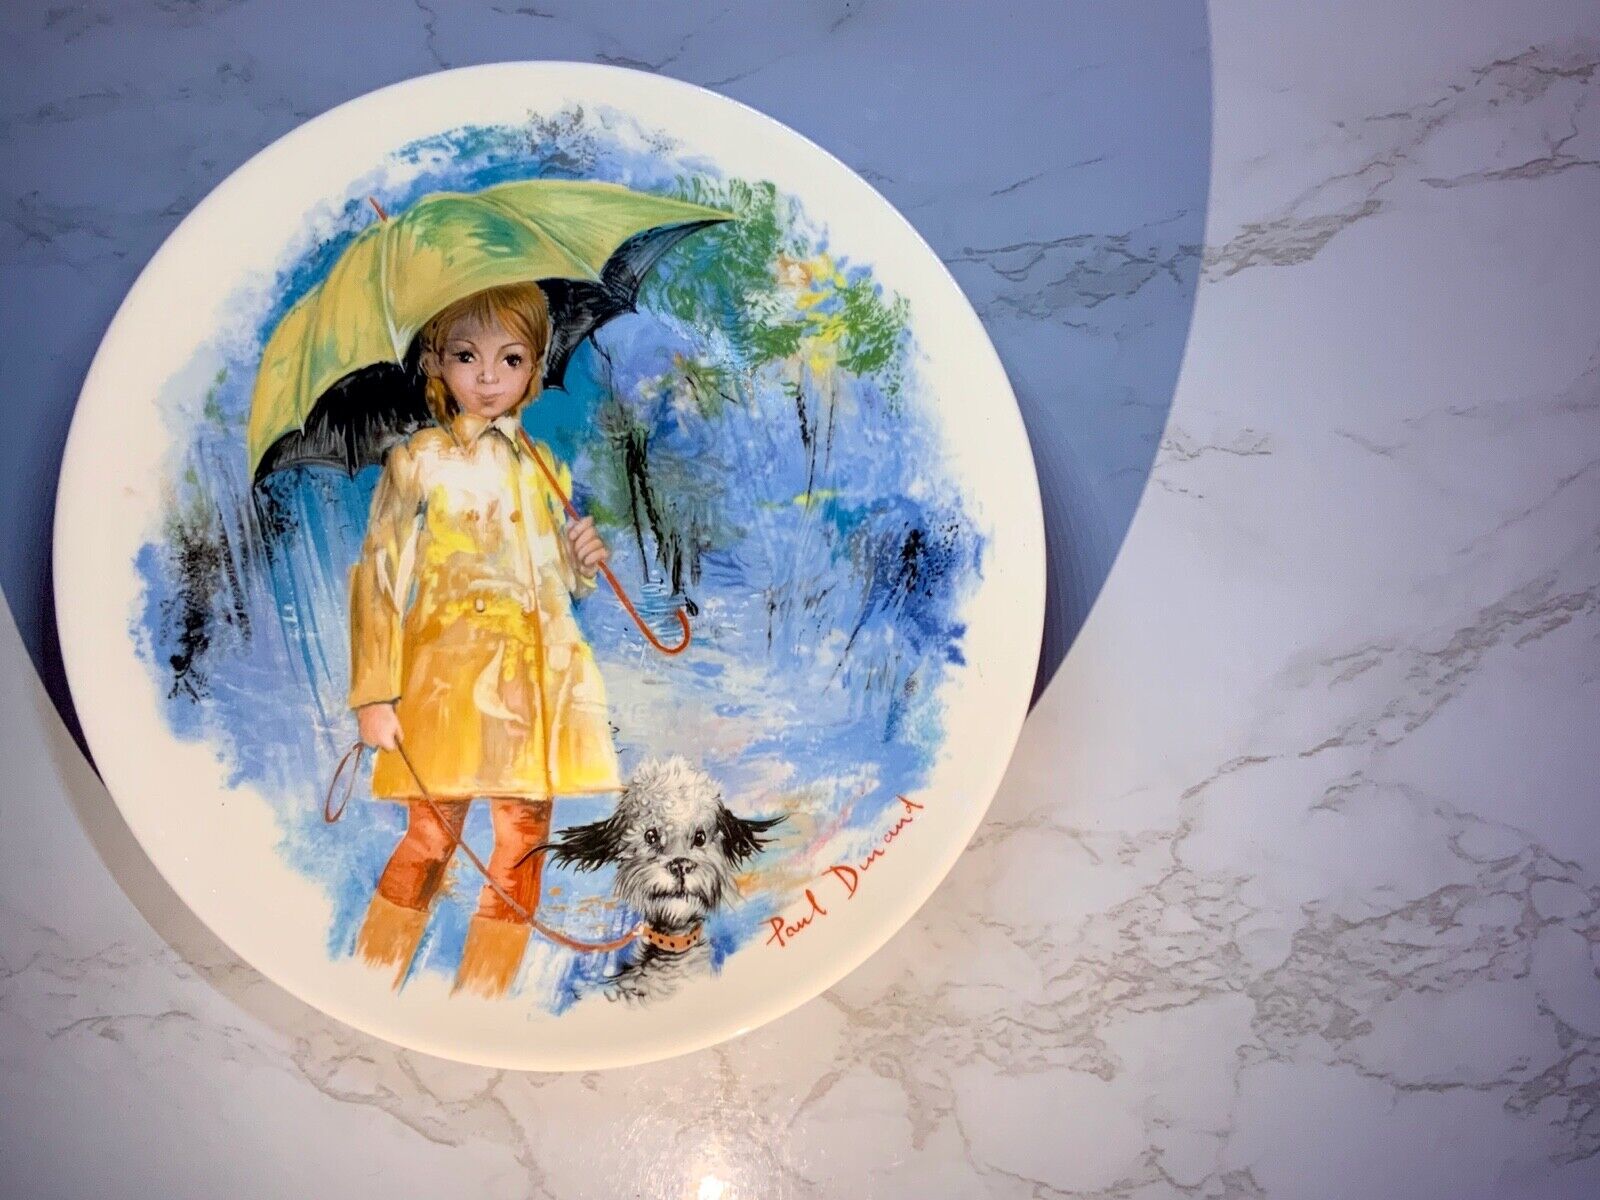 Collectible Plates of Art - Collector items - (SET OF 13 plates)